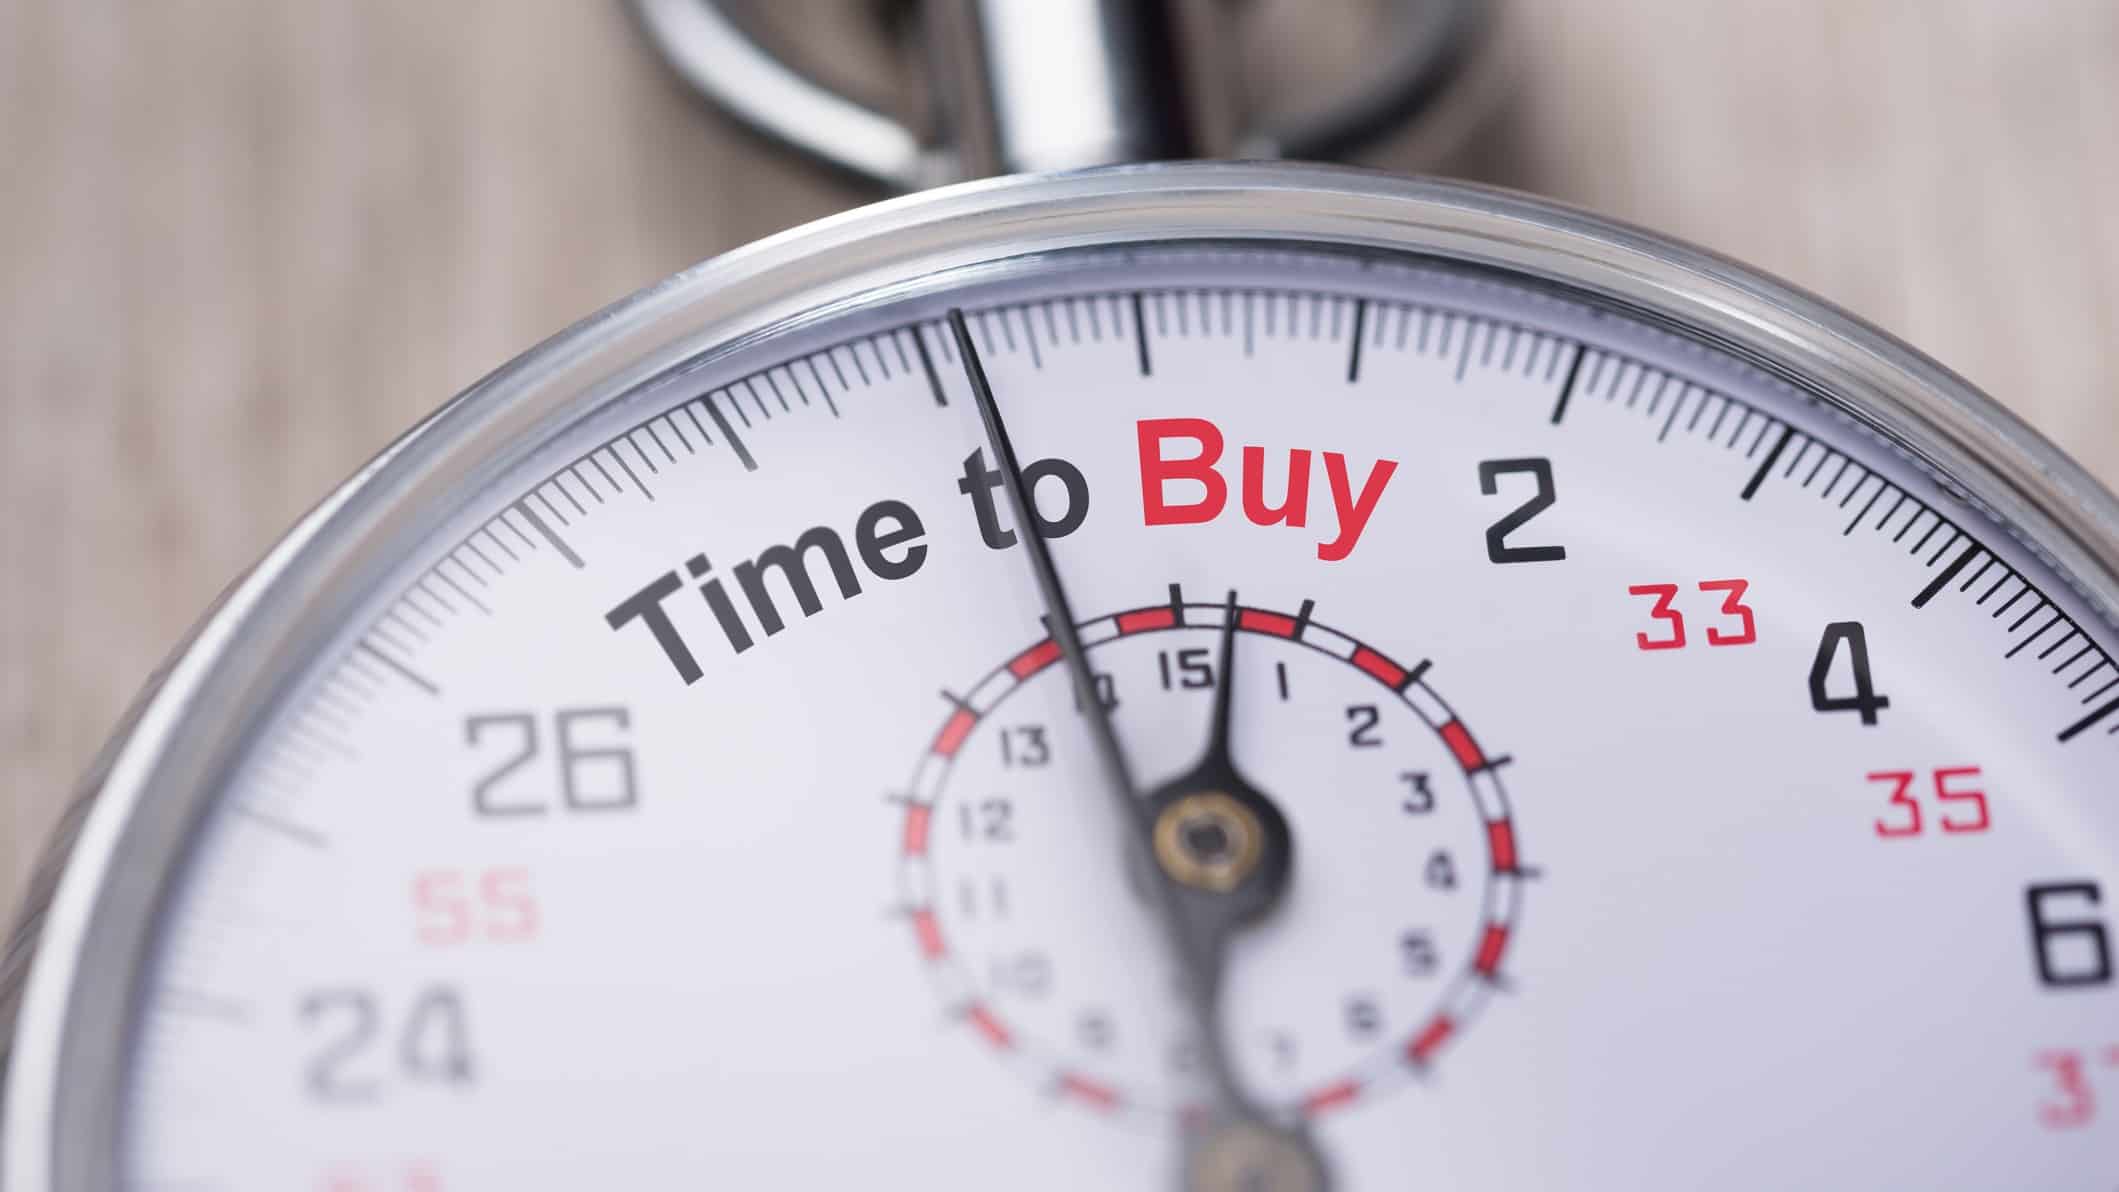 ASX shares upgrade buy latest buy ideas upgrade best buy Stopwatch with Time to Buy on the counter